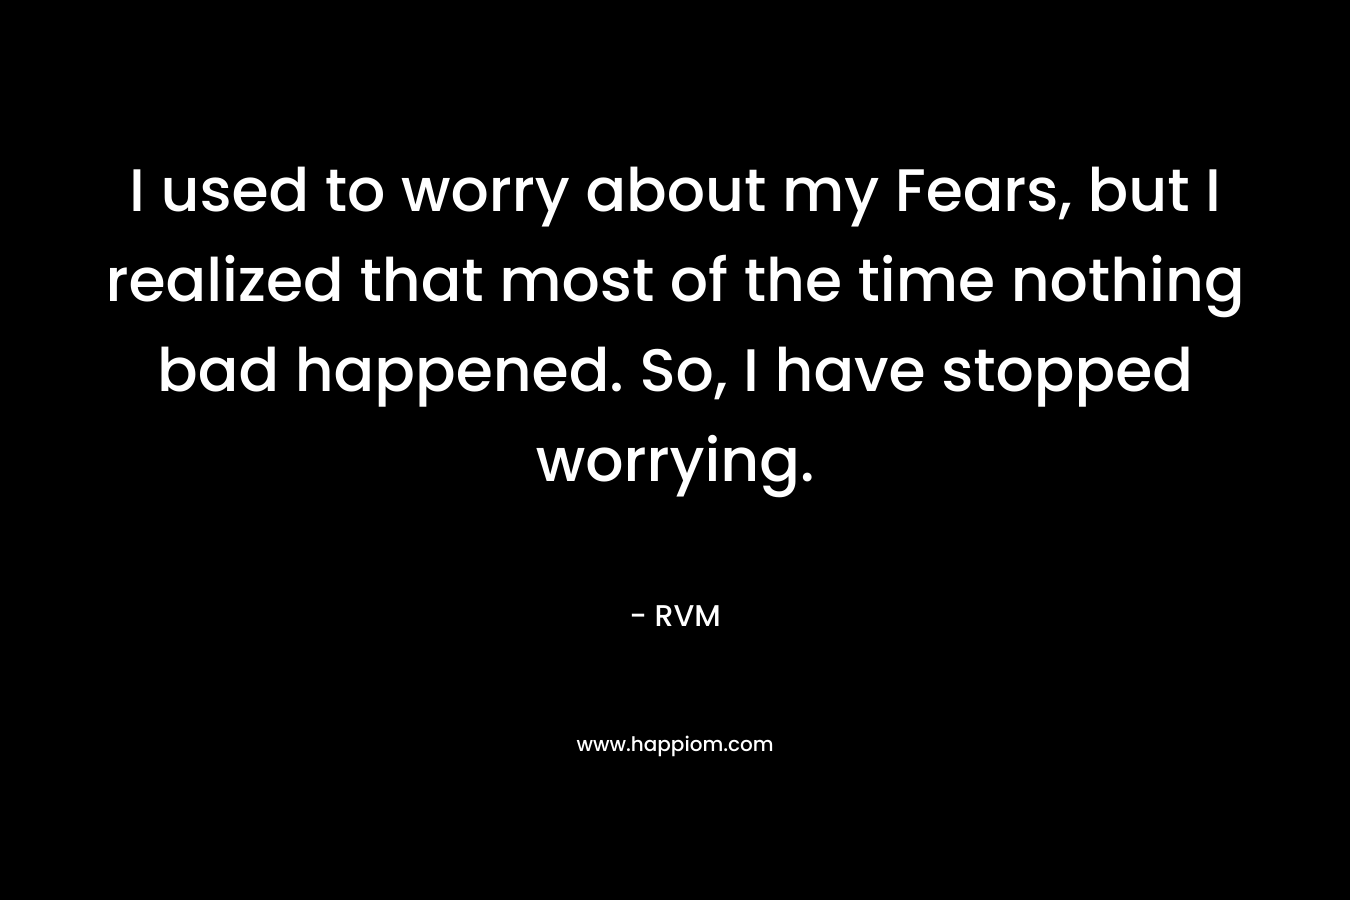 I used to worry about my Fears, but I realized that most of the time nothing bad happened. So, I have stopped worrying.